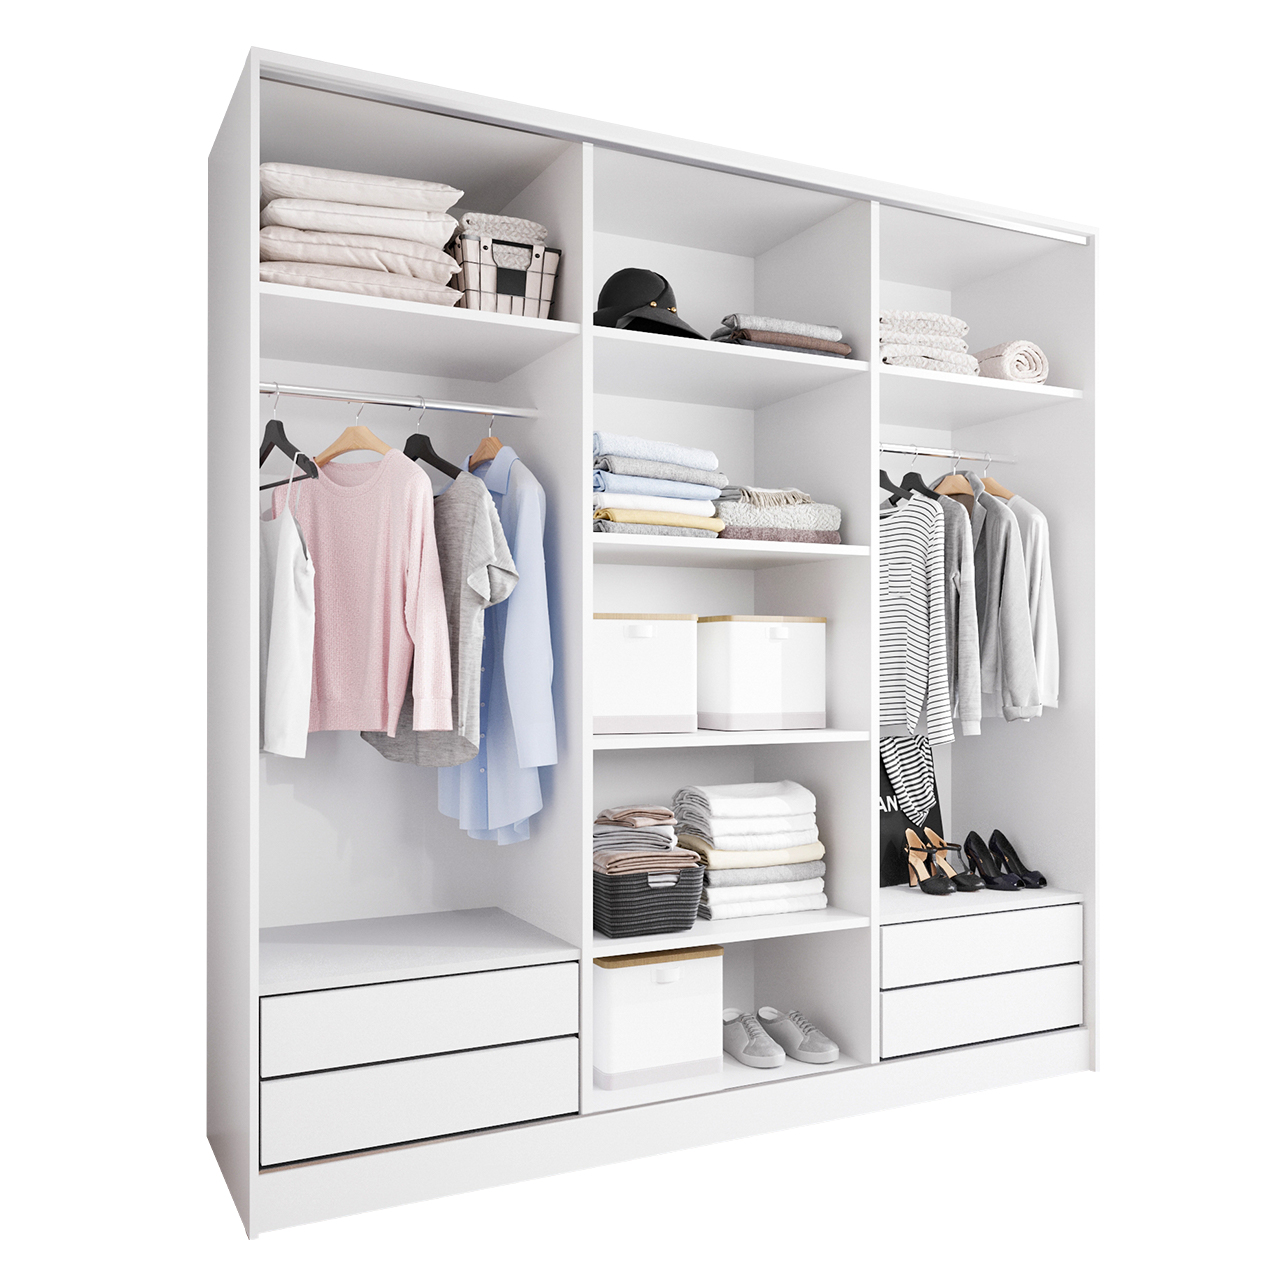 Sliding Wardrobe with Drawers BRITTO D 200 white